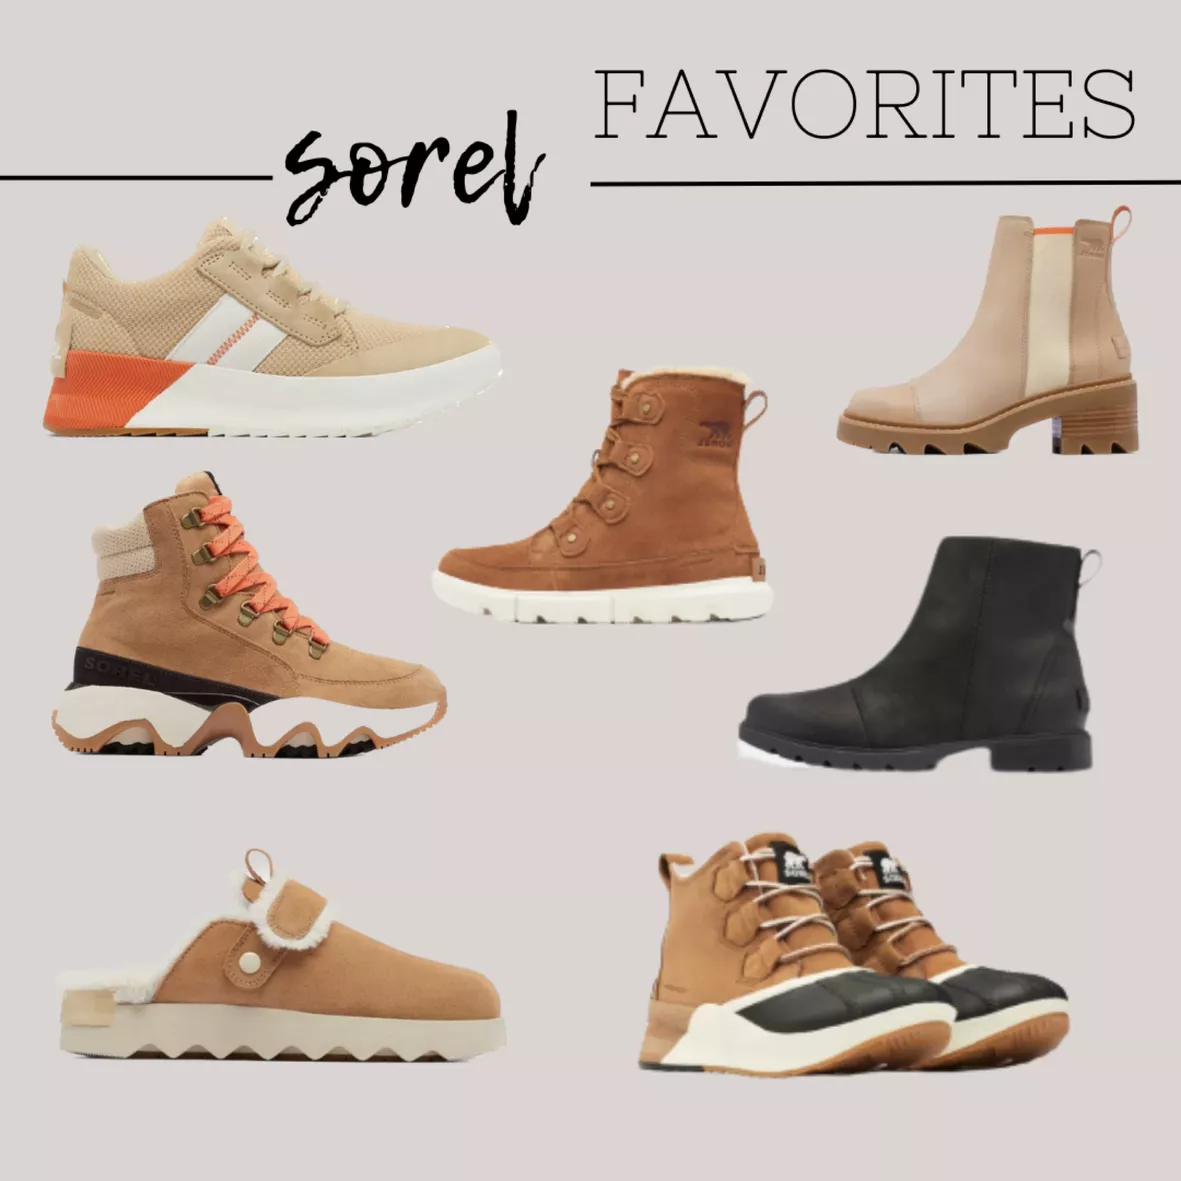 Perfect Winter boots with sherpa curated on LTK